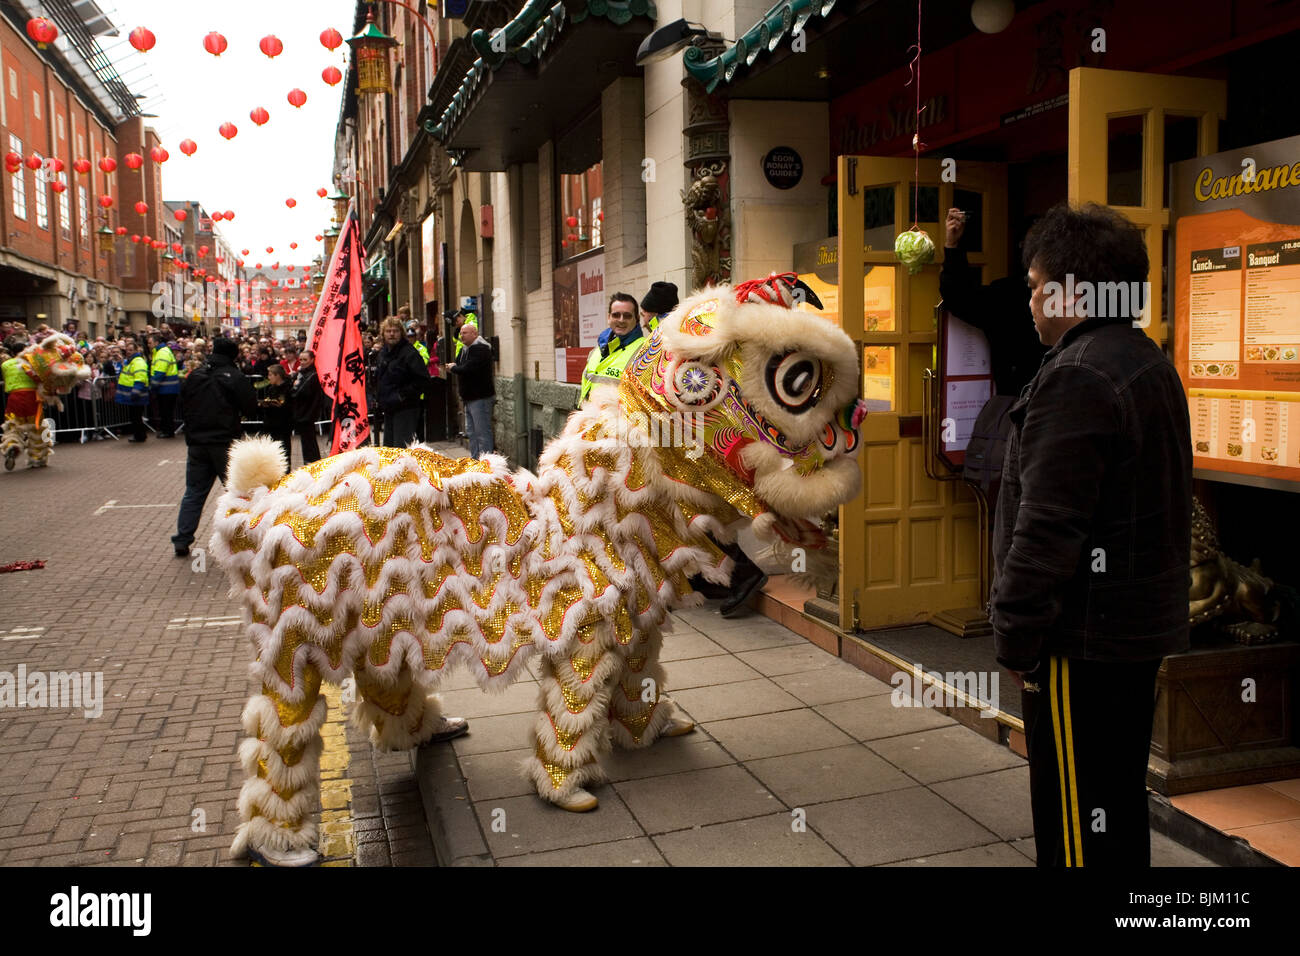 A dragon dances outside of restaurants as part of Chinese New Year celebrations in Chinatown at Newcastle-upon-Tyne, England. Stock Photo